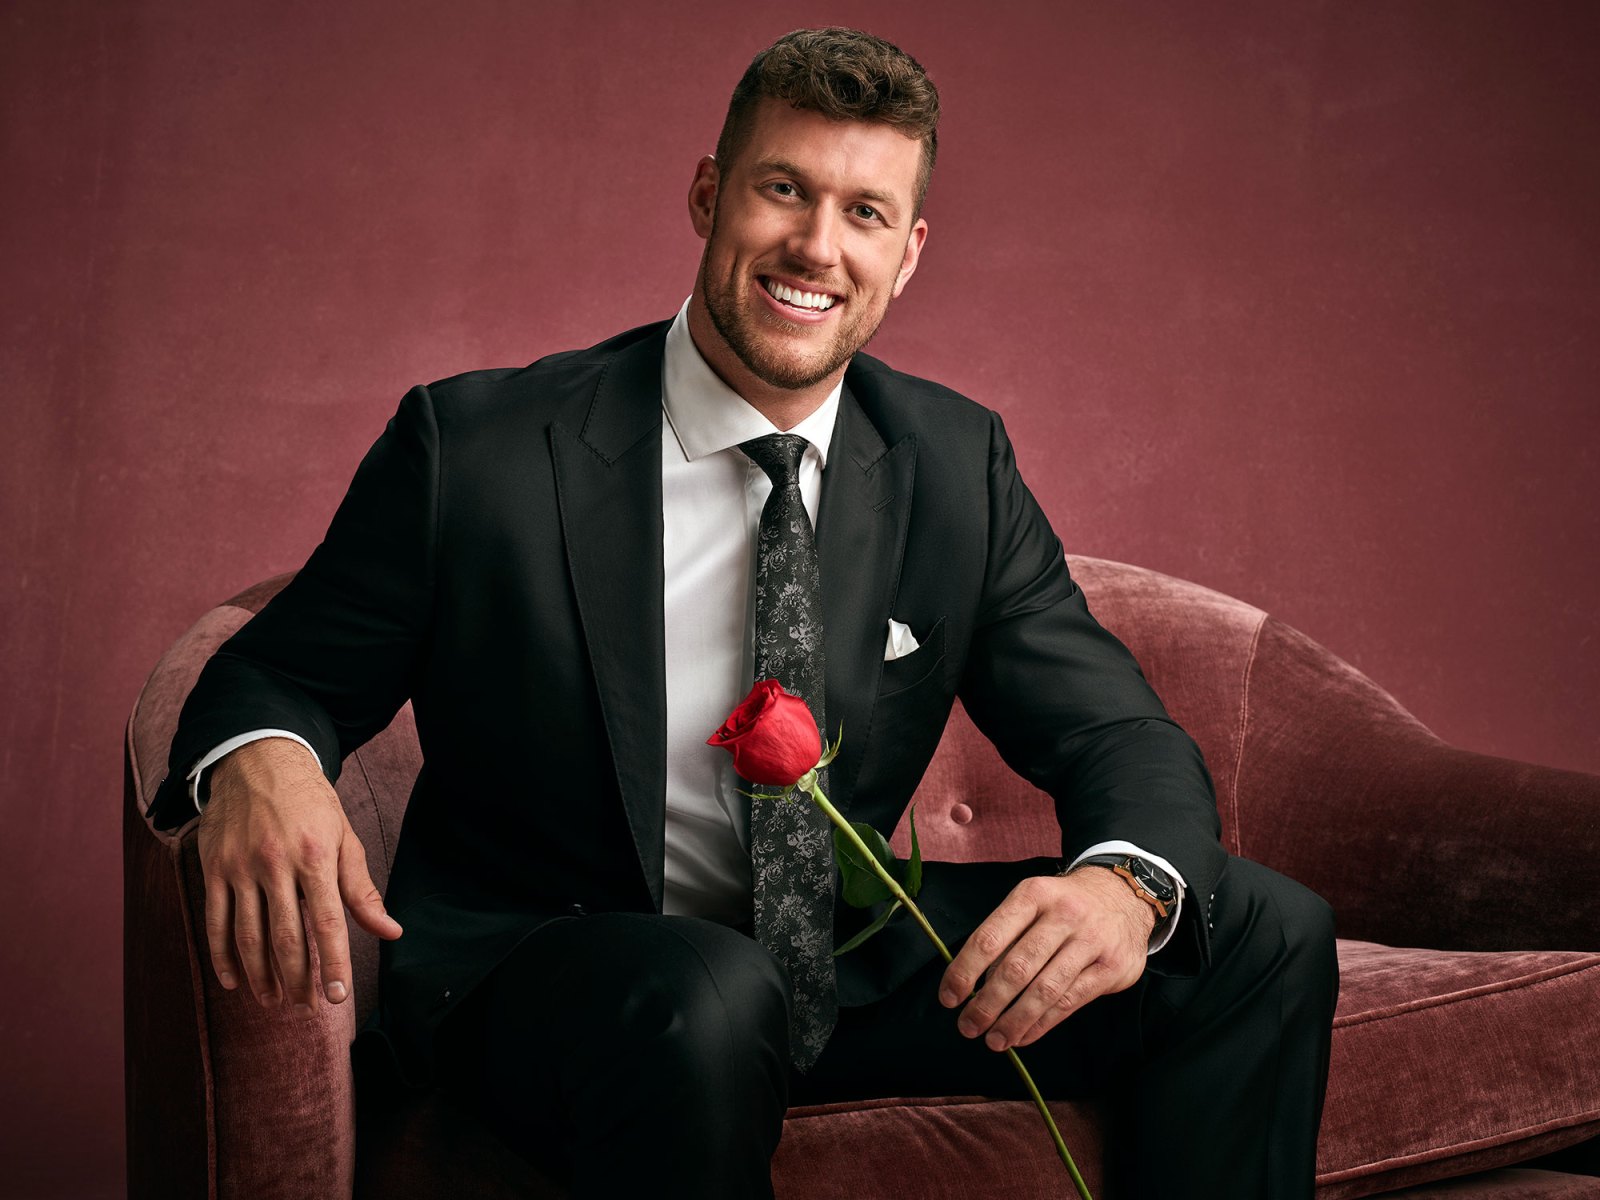 Clayton Echard and His Bachelor Cast Offs Reveal Who They Want to See as the Next Bachelorette